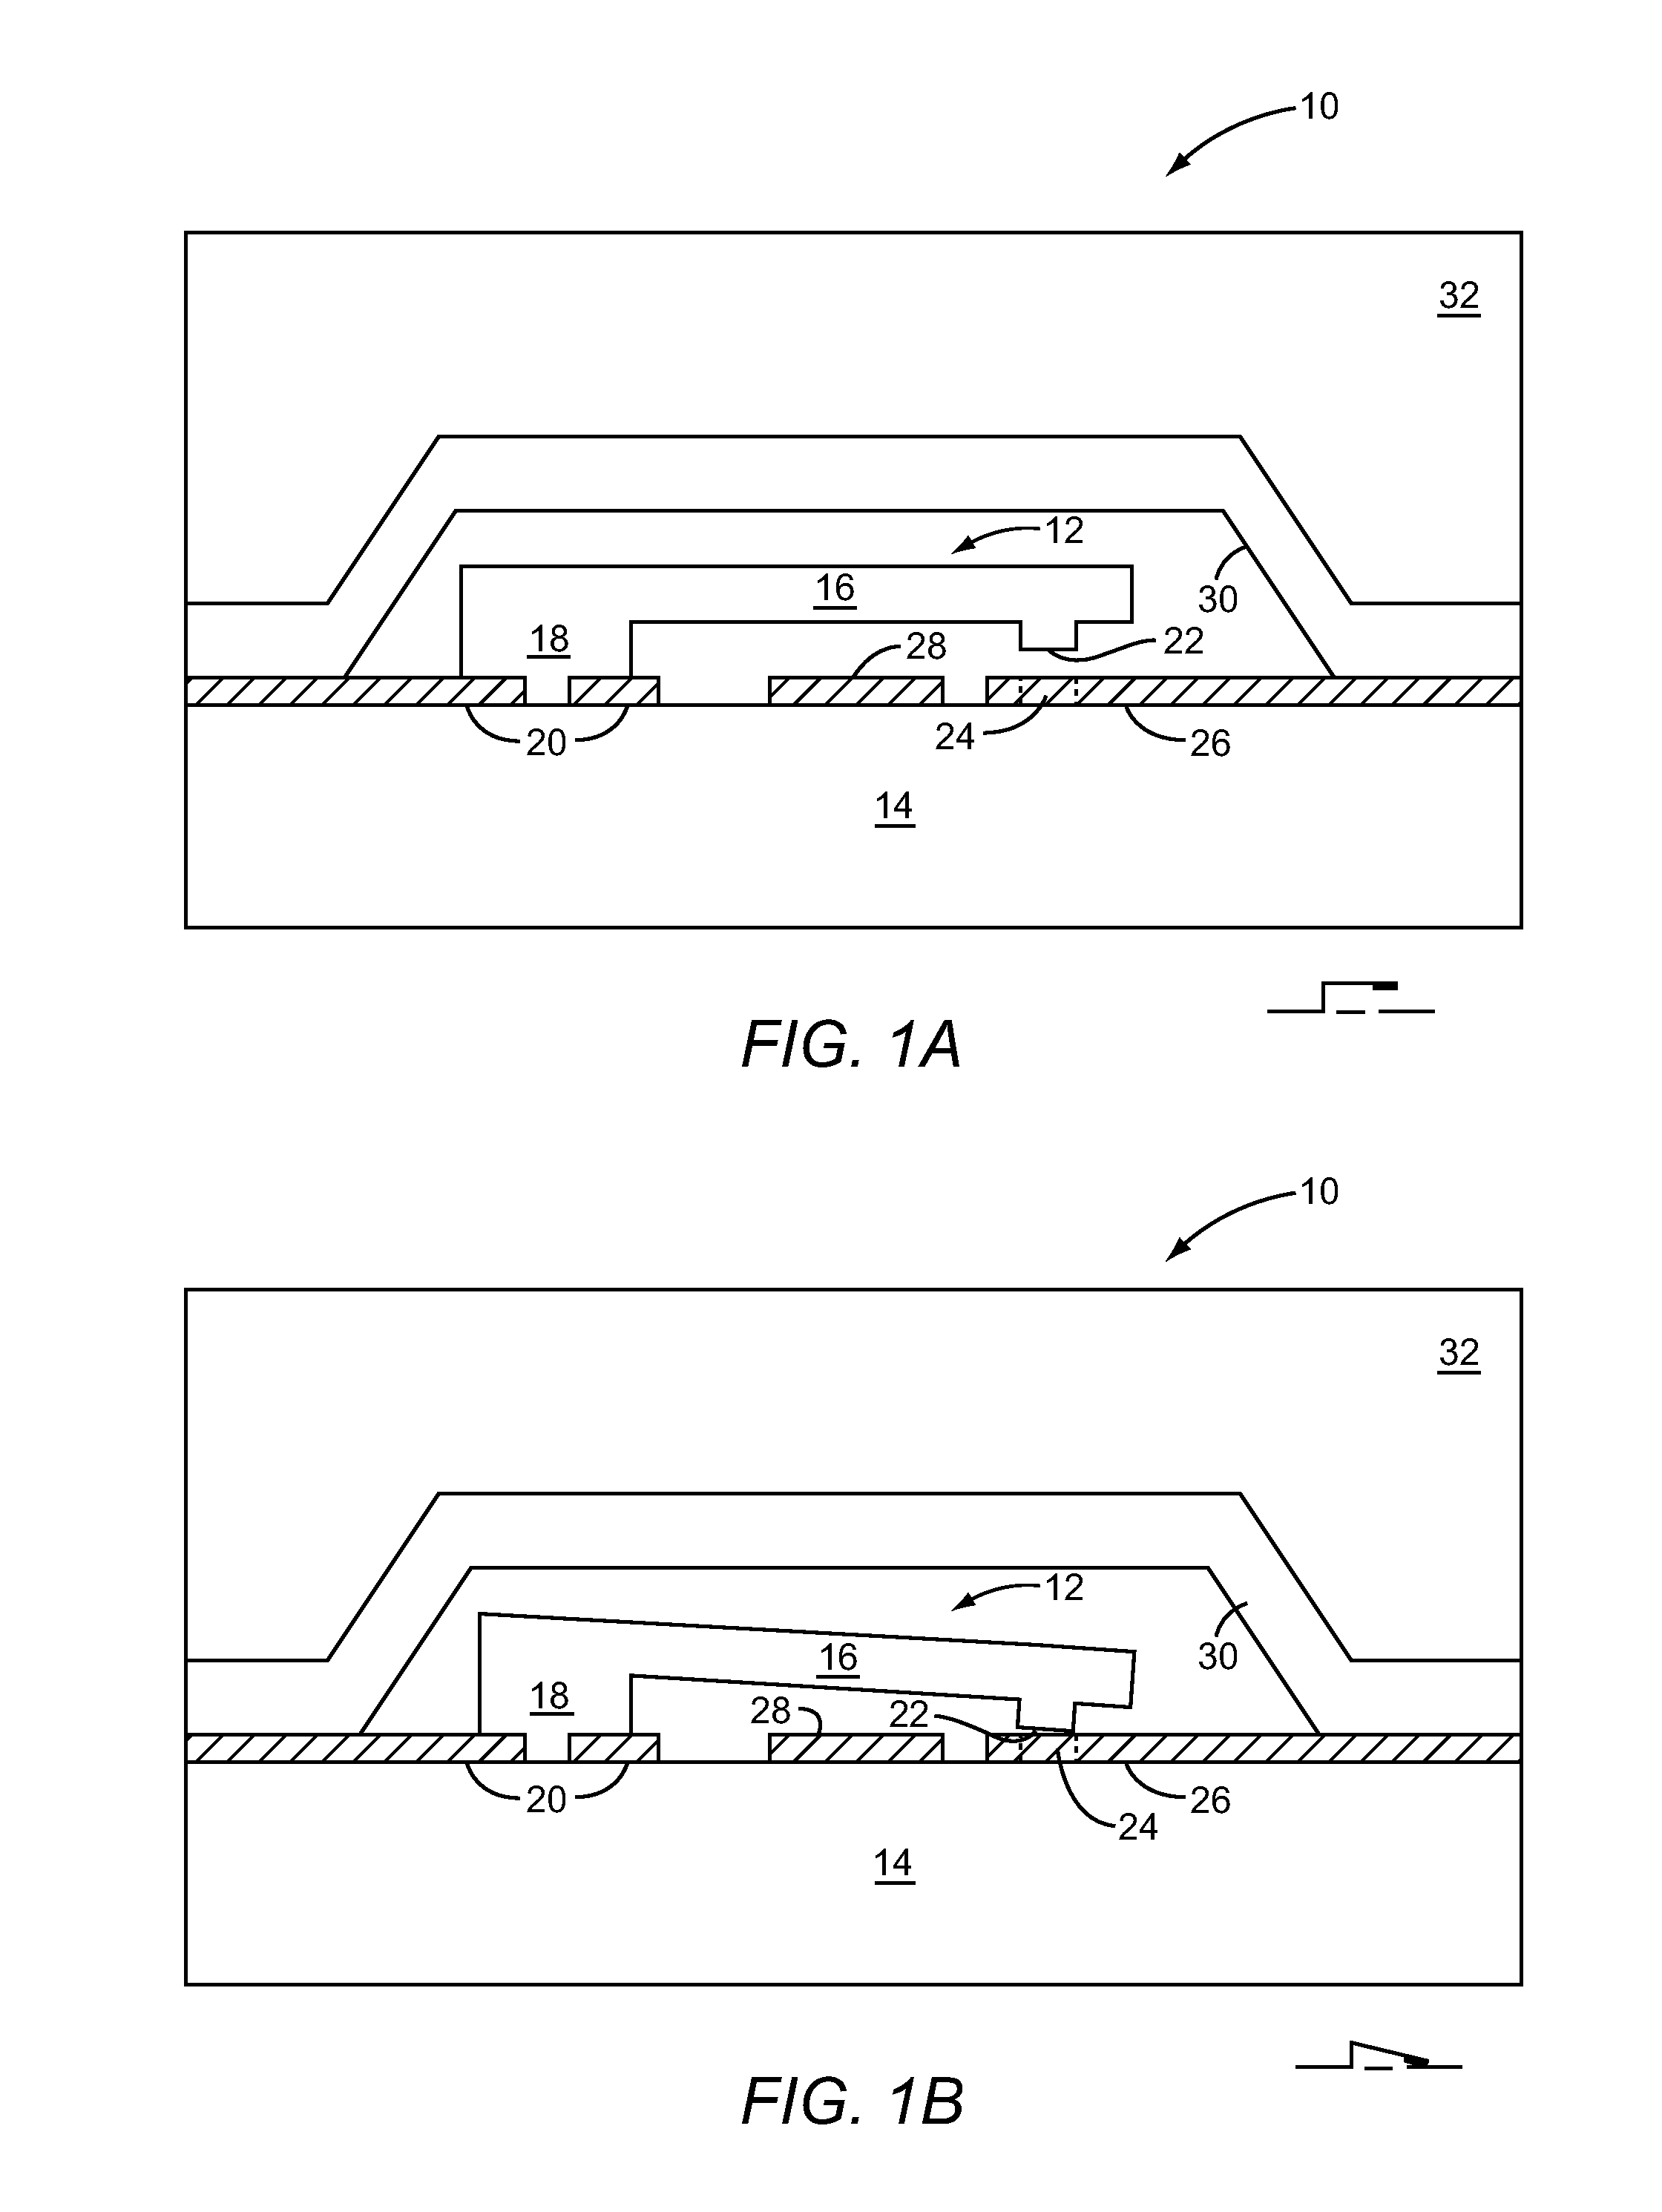 Actuation signal for microactuator bounce and ring suppression